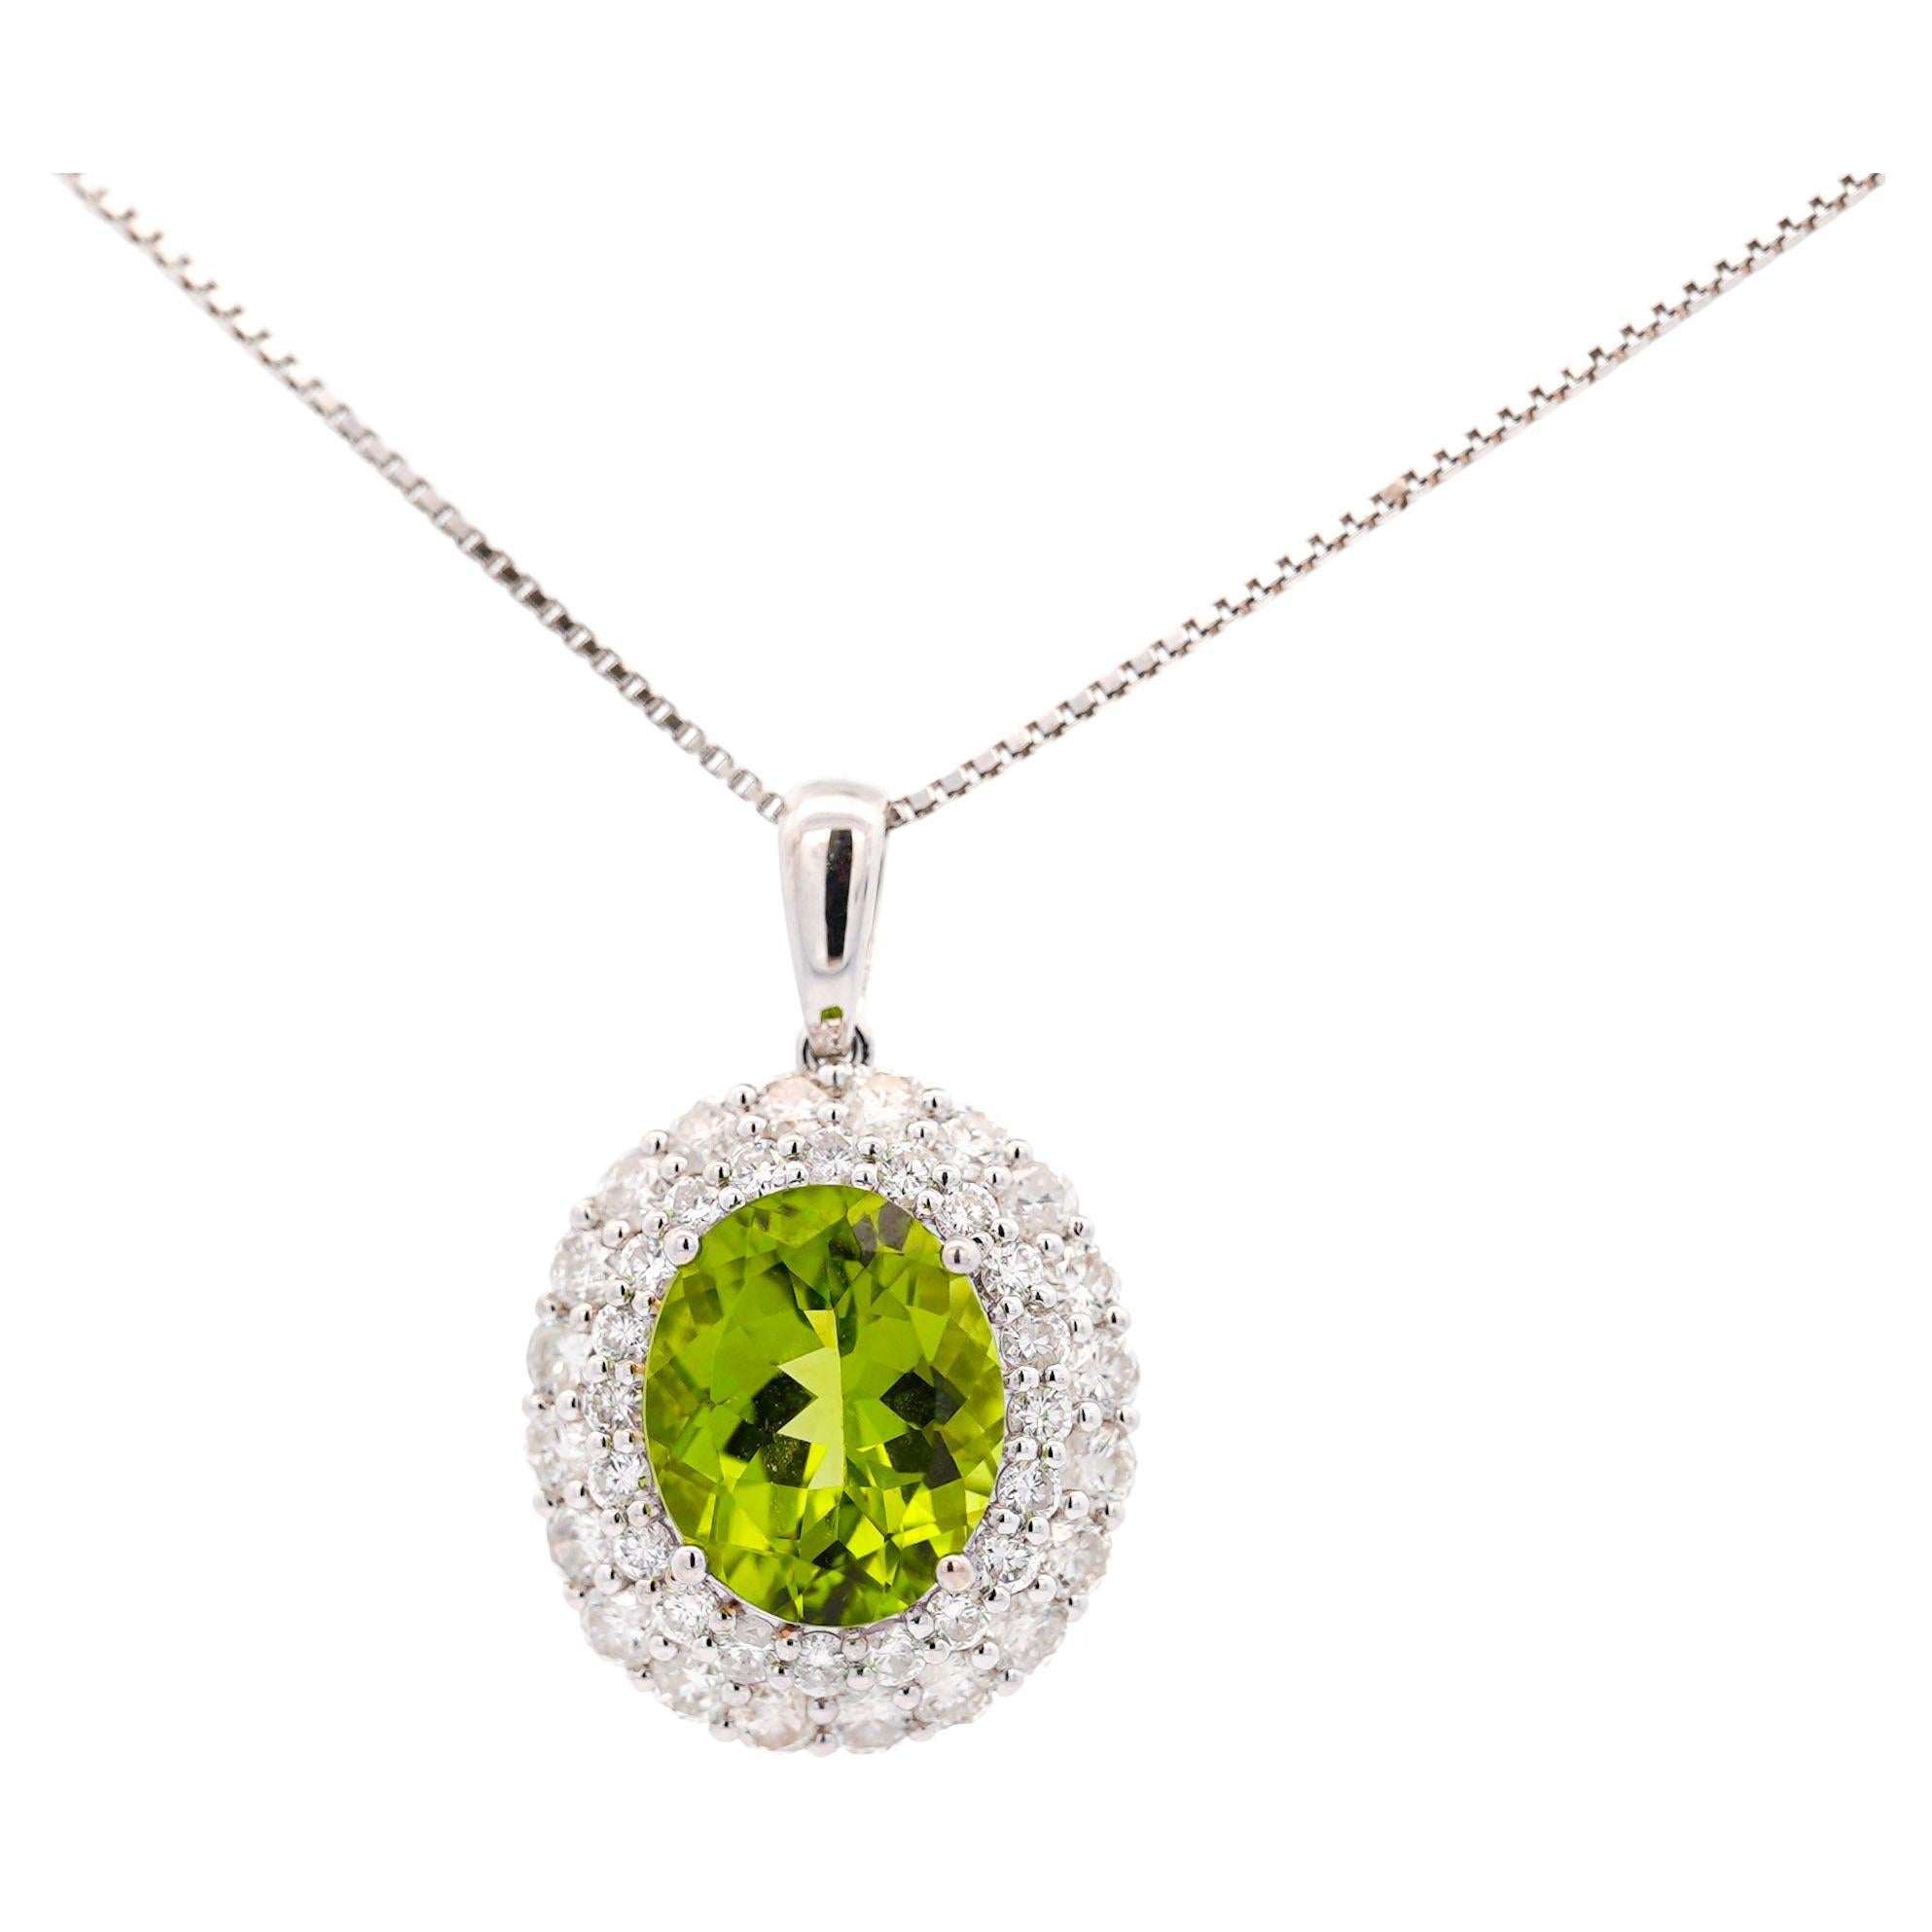 5.03 Carat Oval Peridot Pendant with Round Cut Diamond Halo in 18K White Gold For Sale